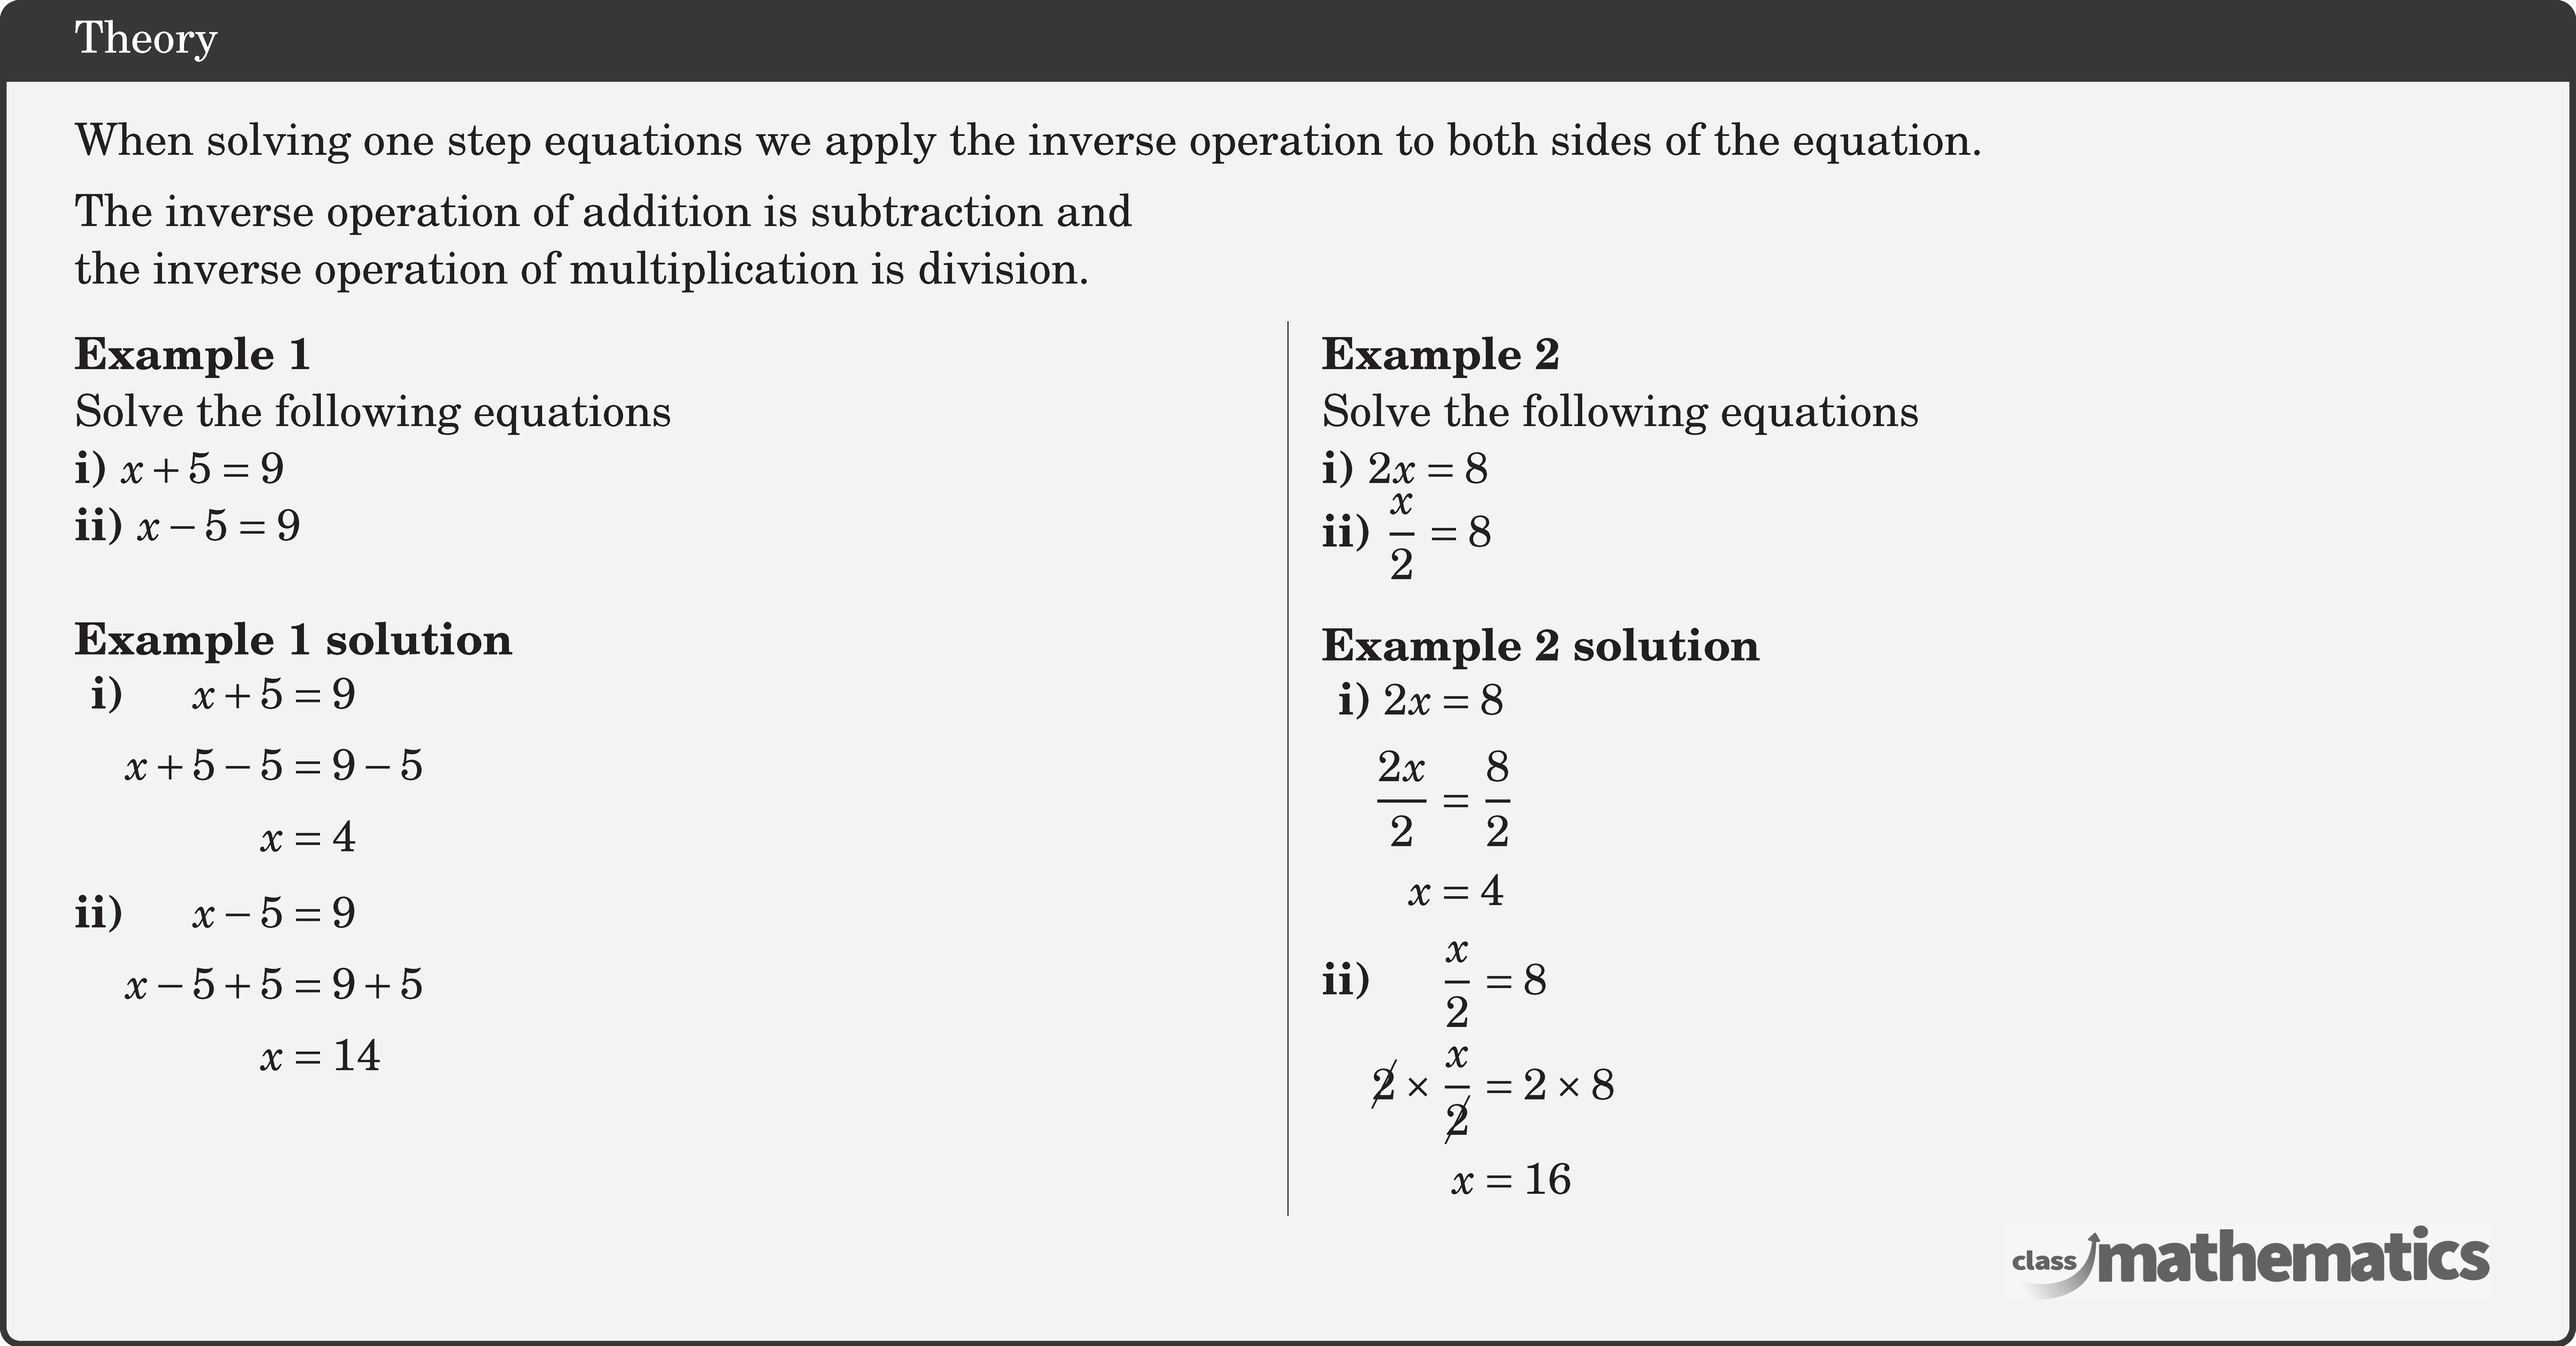 When solving one step equations we apply the inverse operation to both sides of the equation.\\[3pt] The inverse operation of addition is subtraction and \\ the inverse operation of multiplication is division. \begin{multicols}{2}  \textbf{Example 1}\\ Solve the following equations\\ \textbf{i)} \(x+5=9\)\\ \textbf{ii)} \(x-5=9\)\\  \textbf{Example 1 solution}\\ \(\begin{aligned} \textbf{i)}& \begin{aligned}[t] x+5 & =9 \\ x+5-5 & =9-5 \\ x & =4 \end{aligned}\\ \textbf{ii)}& \begin{aligned}[t] x-5&=9 \\ x-5+5&=9+5 \\ x&=14 \end{aligned} \end{aligned}\)   \columnbreak \textbf{Example 2}\\ Solve the following equations\\ \textbf{i)} \(2 x=8\)\\ \textbf{ii)} \(\dfrac{x}{2}=8\)\\  \textbf{Example 2 solution}\\ \(\begin{aligned}  \textbf{i)} &\begin{aligned}[t] 2 x&=8 \\ \frac{2 x}{2}&=\frac{8}{2} \\ x&=4 \end{aligned}\\ \textbf{ii)} &\begin{aligned}[t] \frac{x}{2} & =8 \\ \cancel{2} \times \frac{x}{\cancel{2}} & =2 \times 8 \\ x & =16 \end{aligned} \end{aligned}\) \end{multicols}